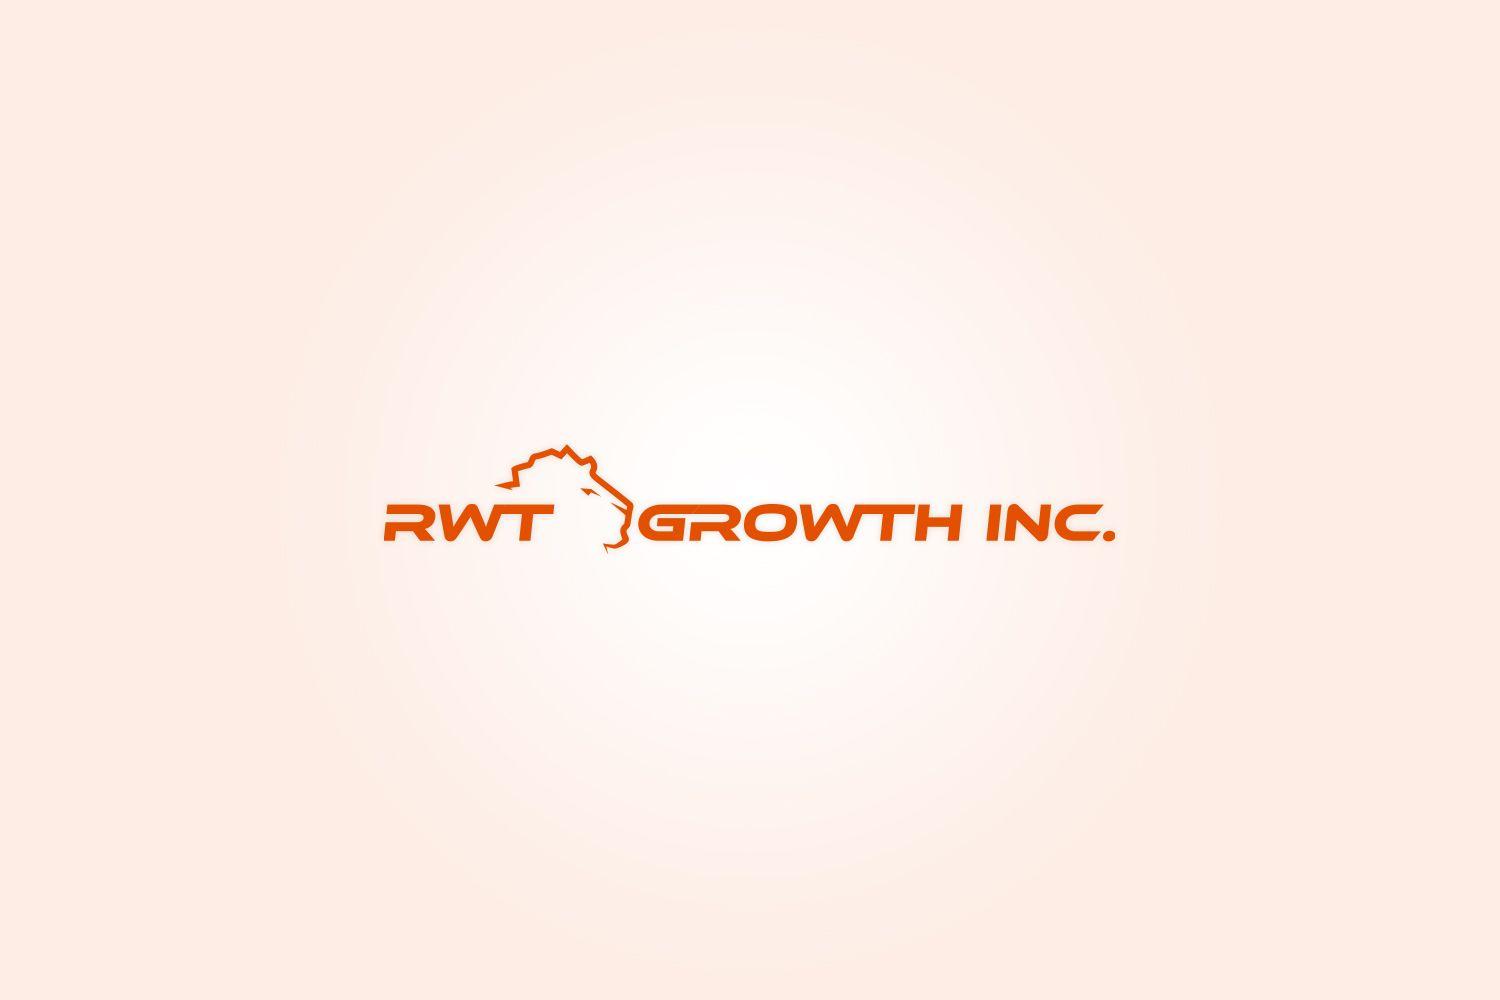 Investment Banking Logo - Bold, Modern, Investment Banking Logo Design for RWT Growth Inc. by ...